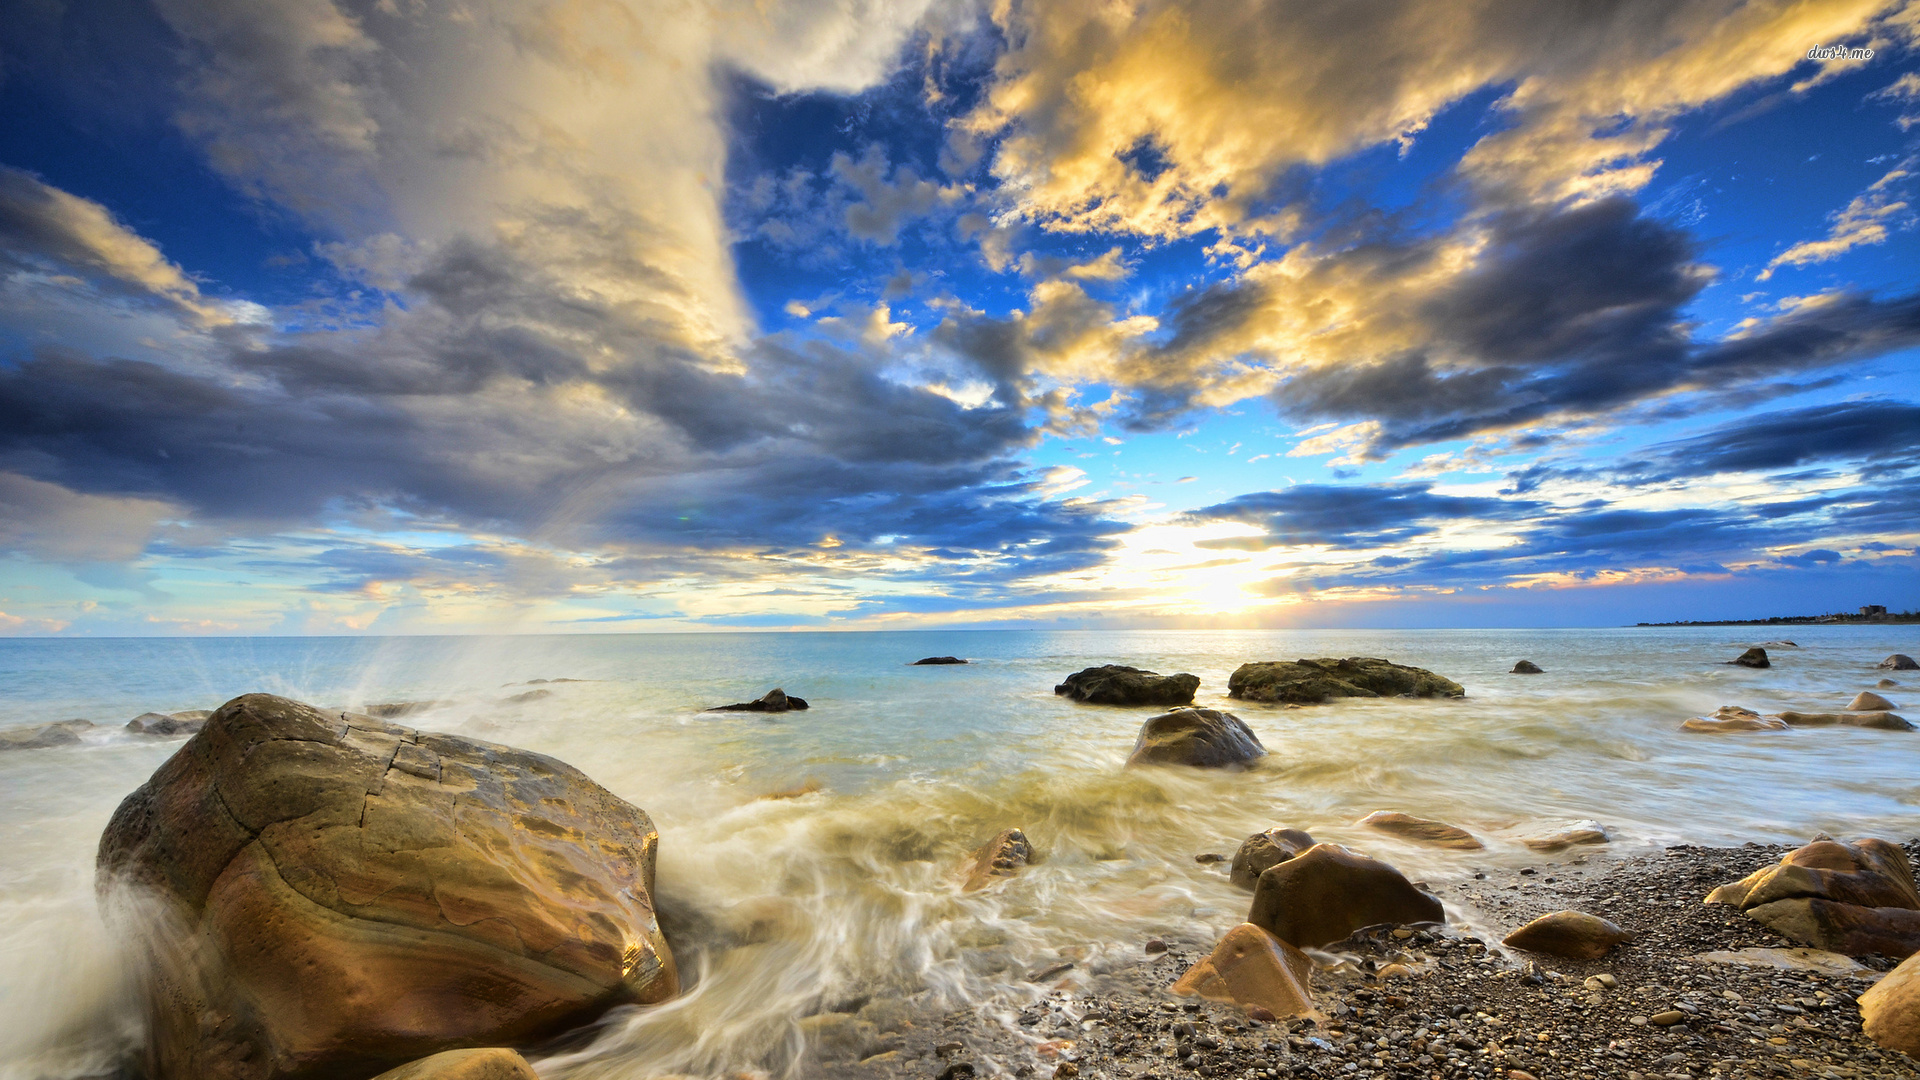 Beautiful clouds over rocky shore wallpaper - Beach wallpapers - #35207